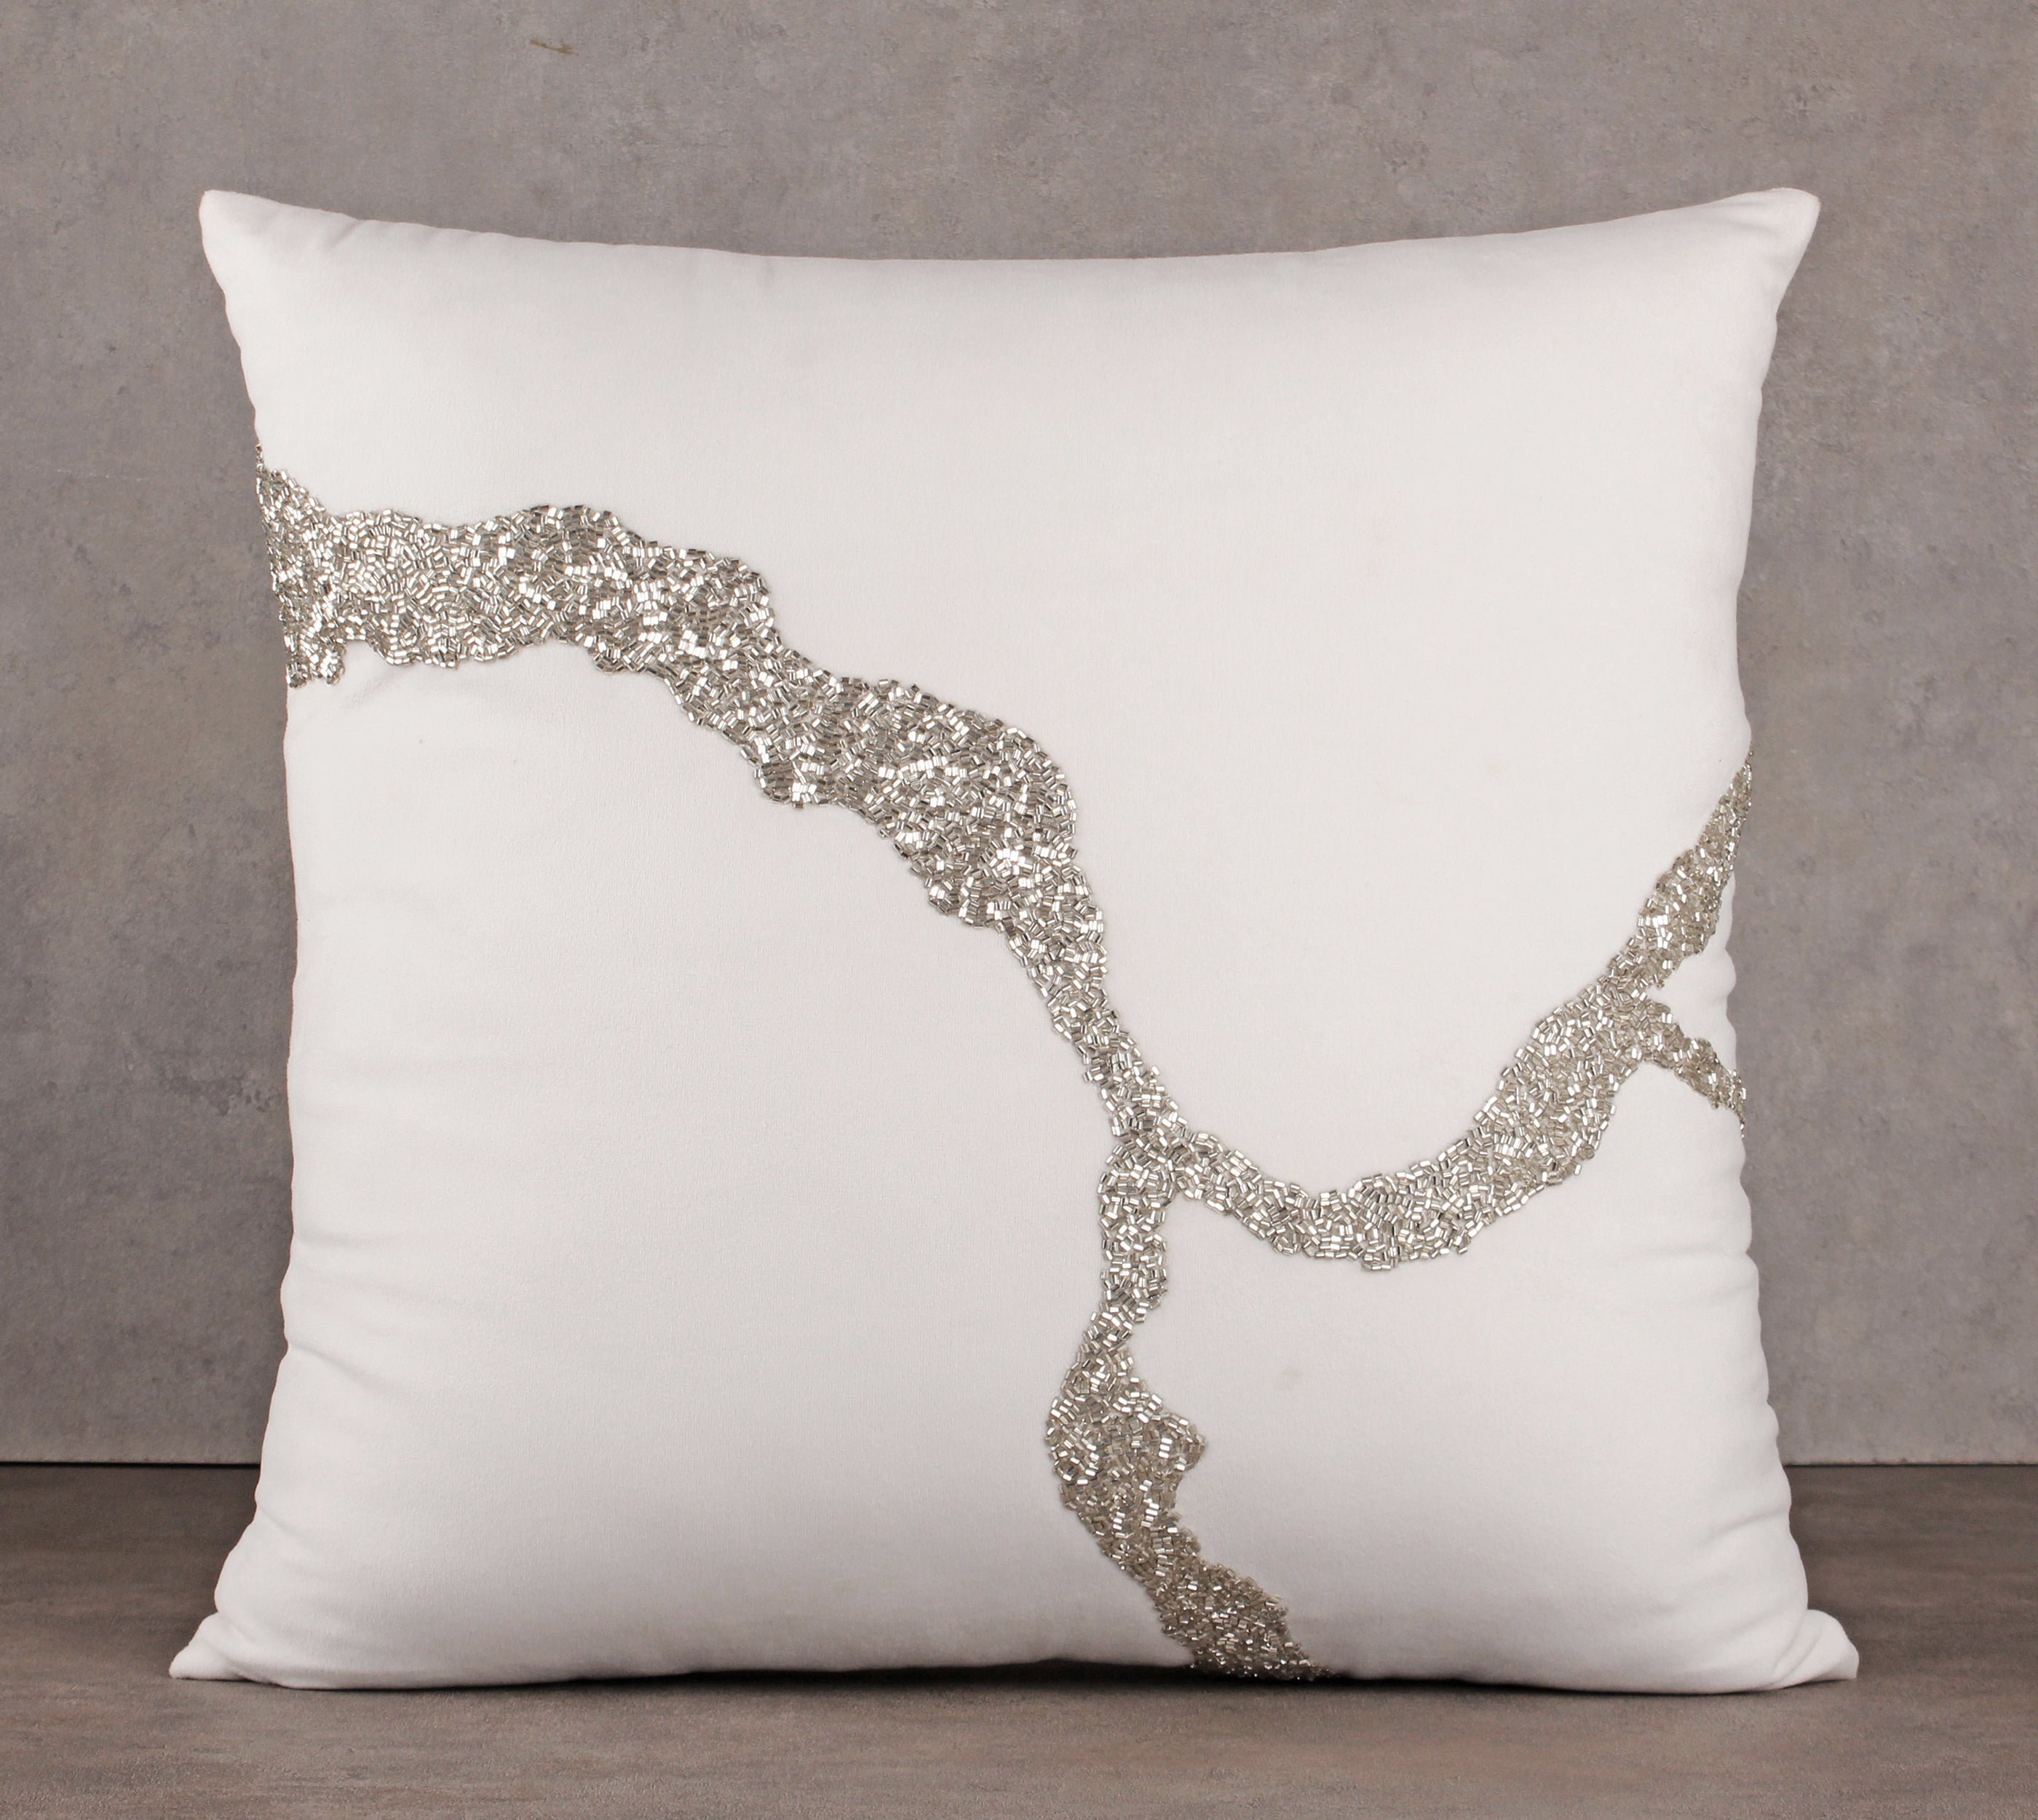 White and Silver Cushion Cover